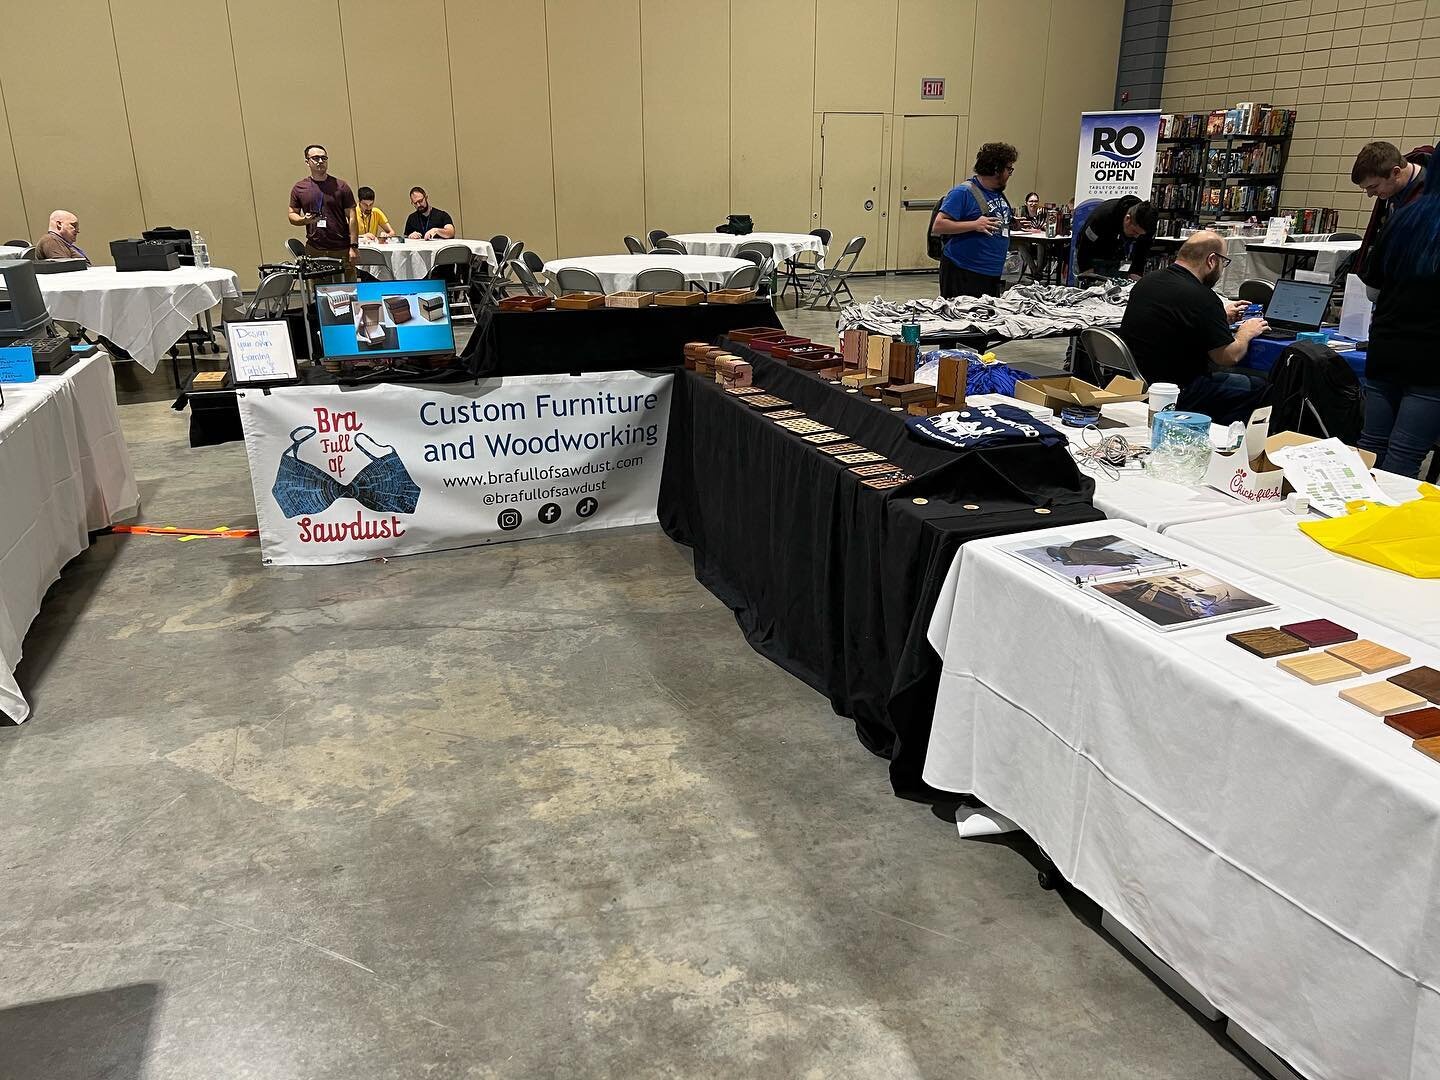 Richmond Open is in full swing! I love seeing familiar faces from @novaopenconvention and repeat customers like Roy! Come on out for open gaming, RPG groups, and to see the amazing terrain for the war games @richmondopengaming 

#boardgames #wargamin